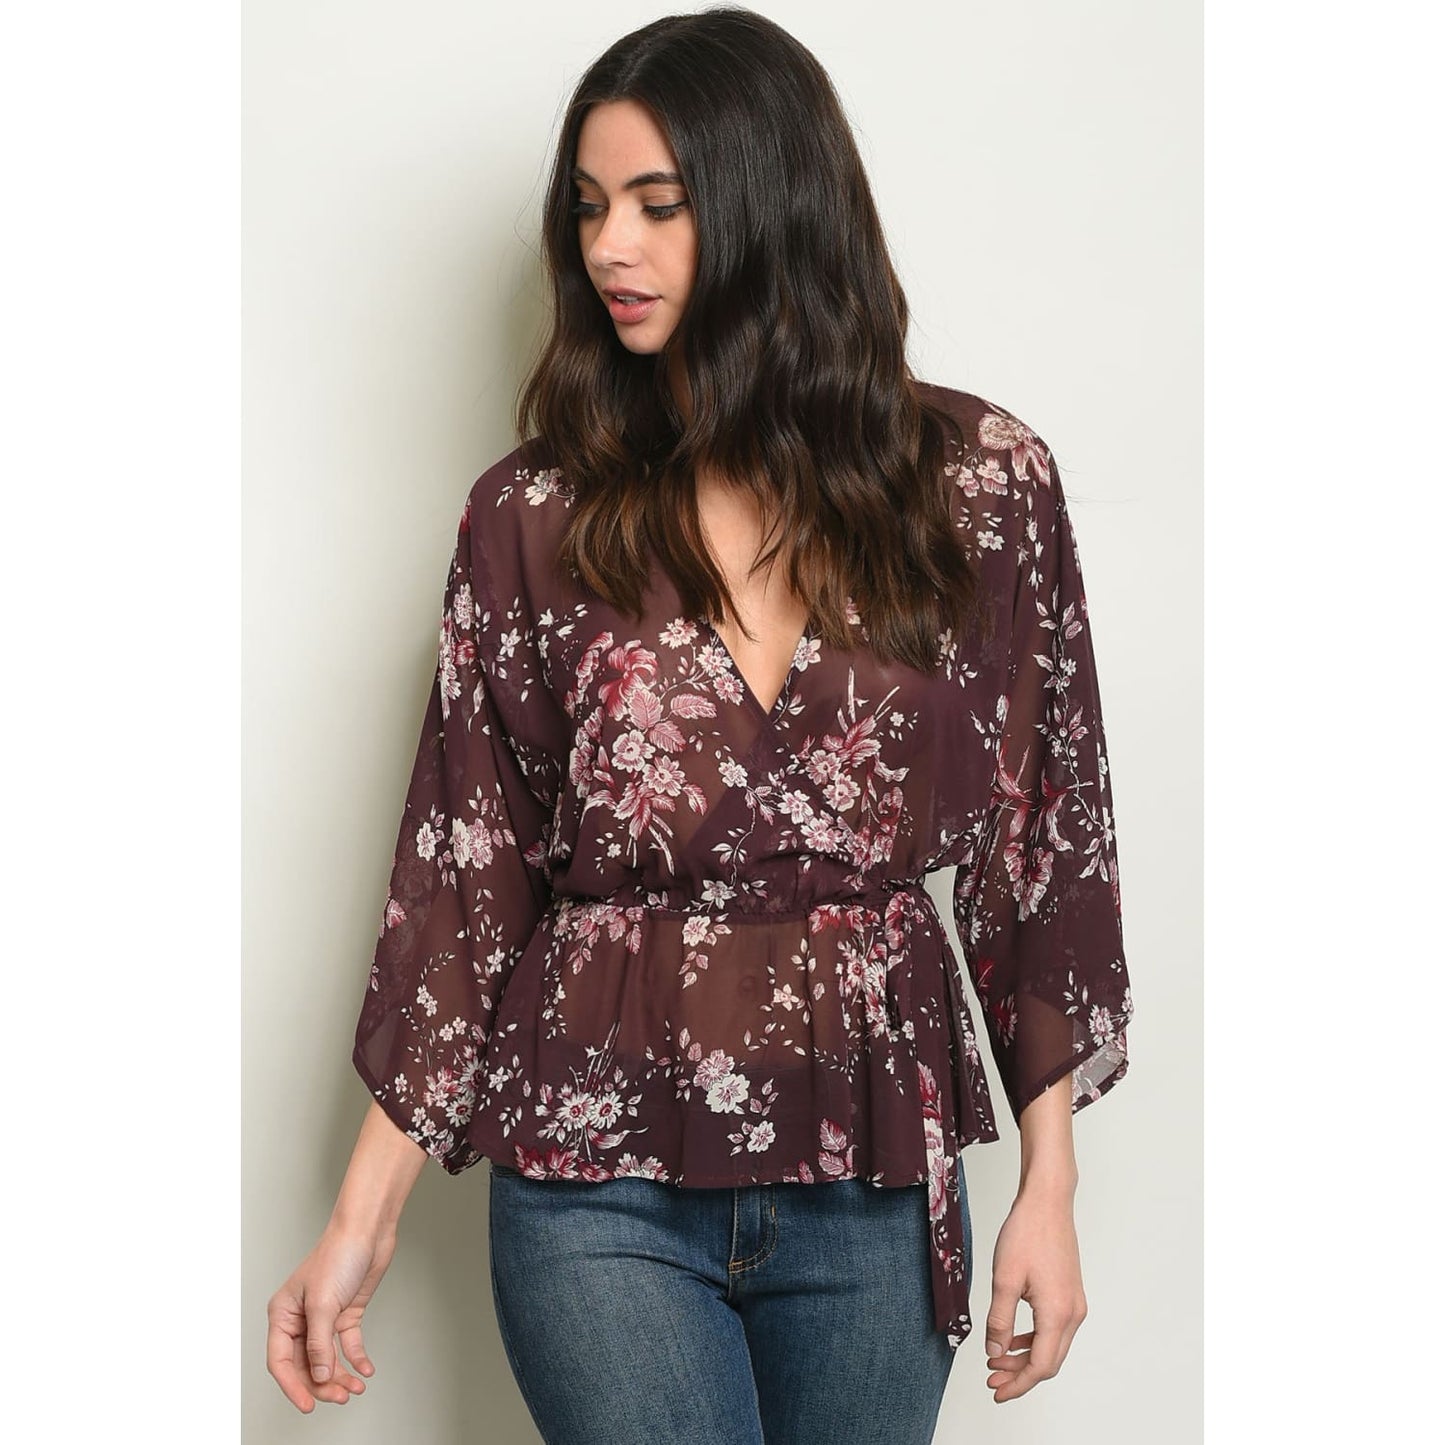 Plum Floral Top - Best YOU by HTS